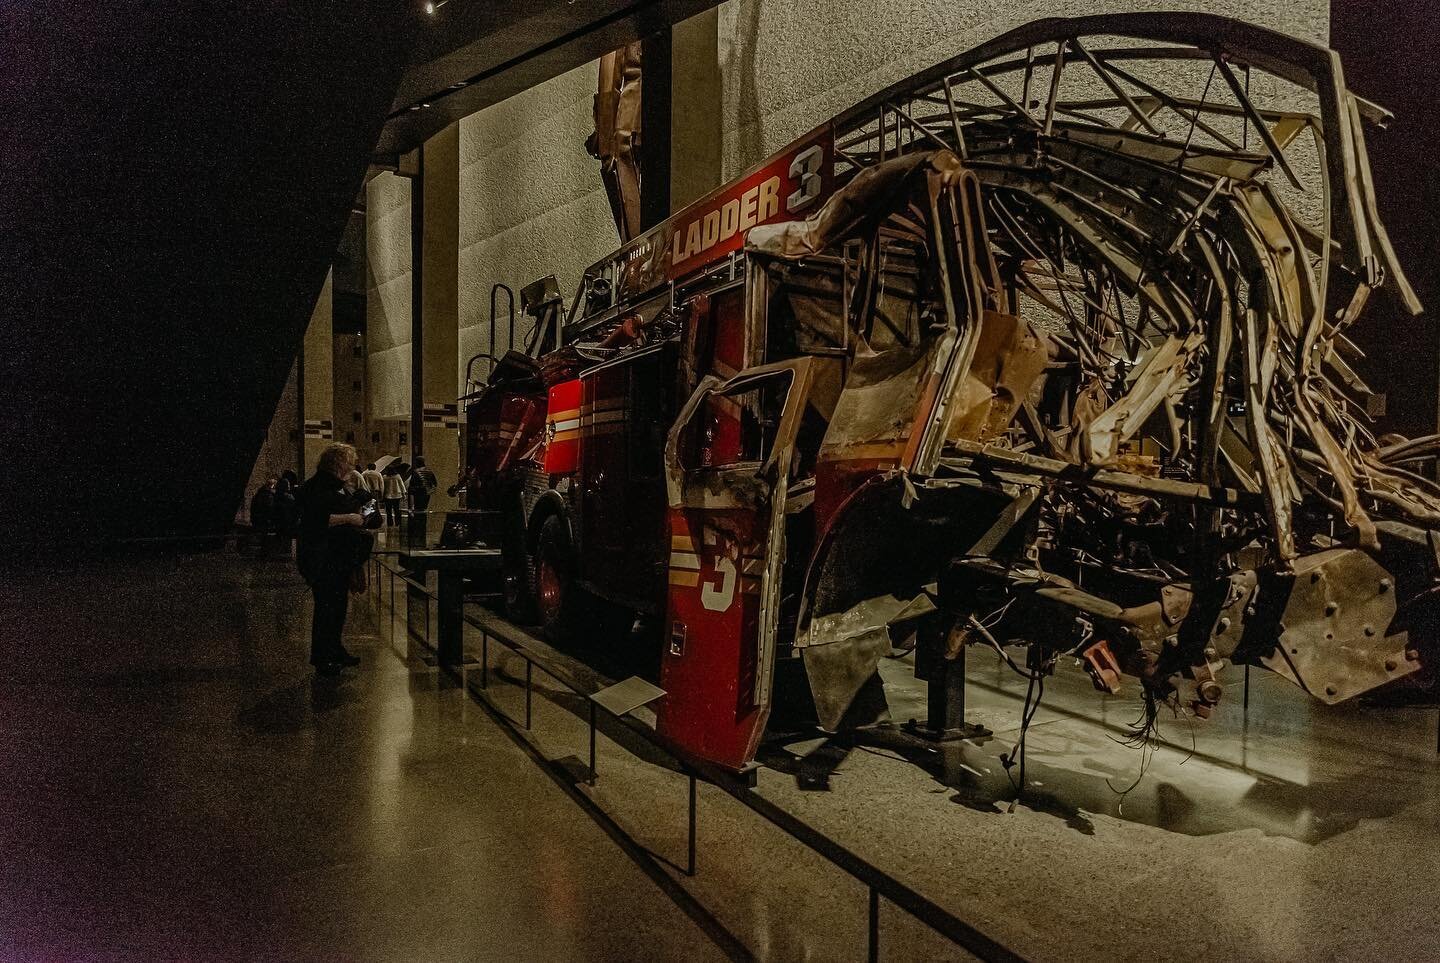 Mangled fire trucks, a poignant reminder.

Abandoned firefighting gear, a tribute to the fallen.

echoing PASS alarms in that hall, a chilling chorus.

The frantic dispatchers' voices, etched in our memories.

Unclaimed remains, a stark reminder of S